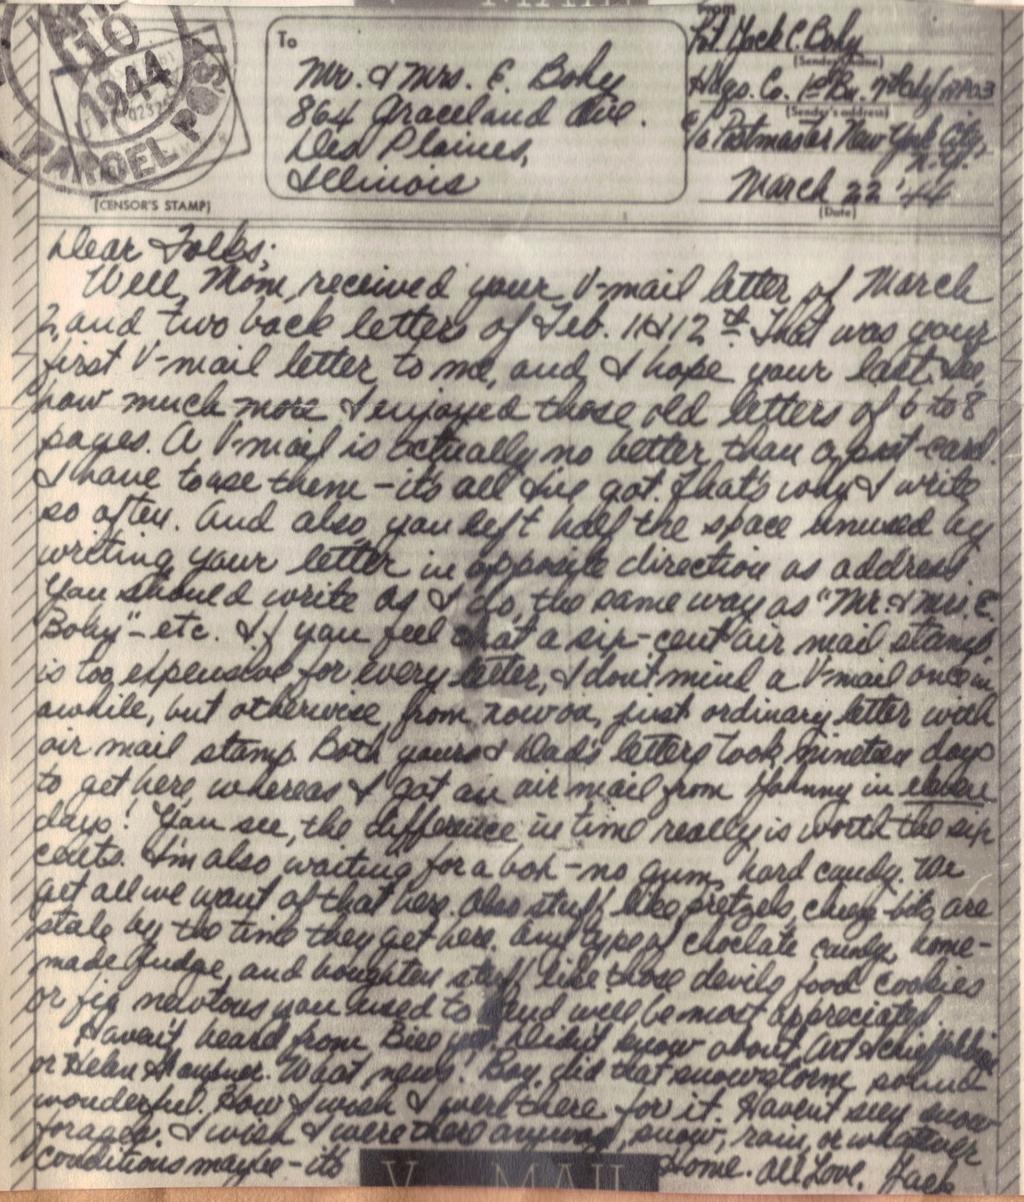 Mar 22, 1944 Dear folks; Well, Mom, received your V-mail letter of March 2, and two back letters of Feb. 11 and 12th. That was your first V-mail letter to me and I hope your last.